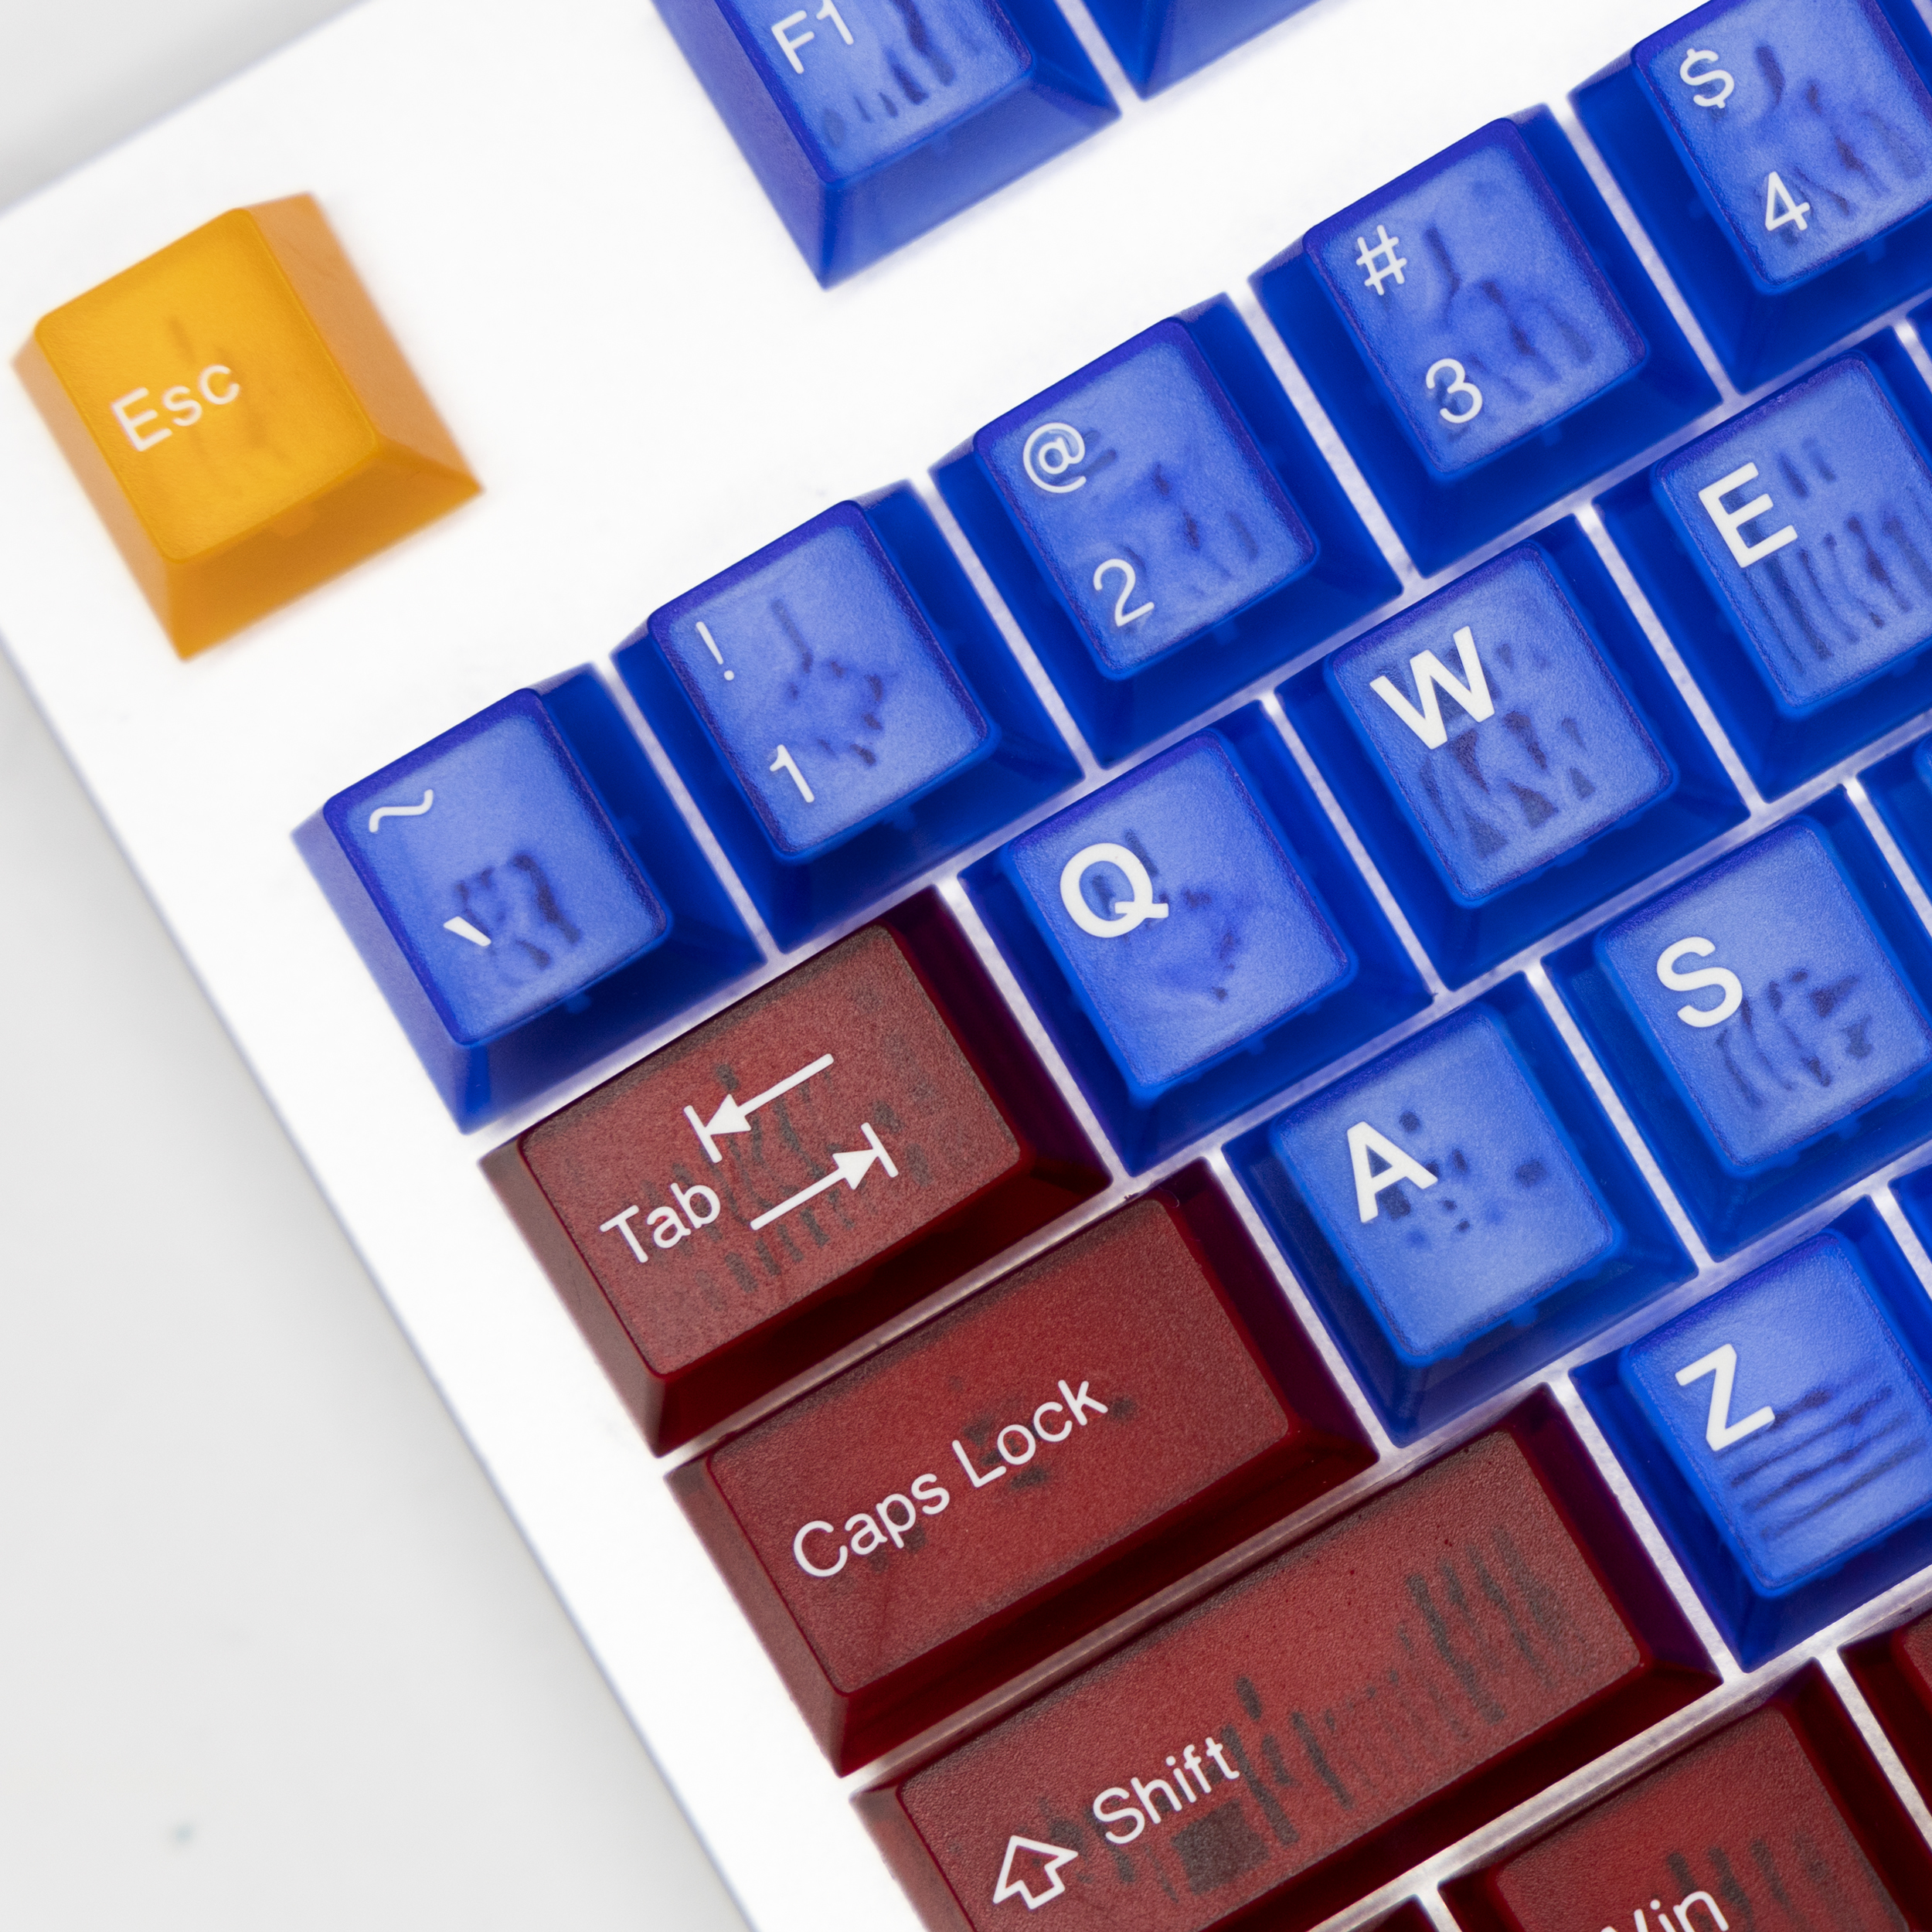 Taihao DoubleShot Keycaps,Gaming Keycaps, Backlit ABS